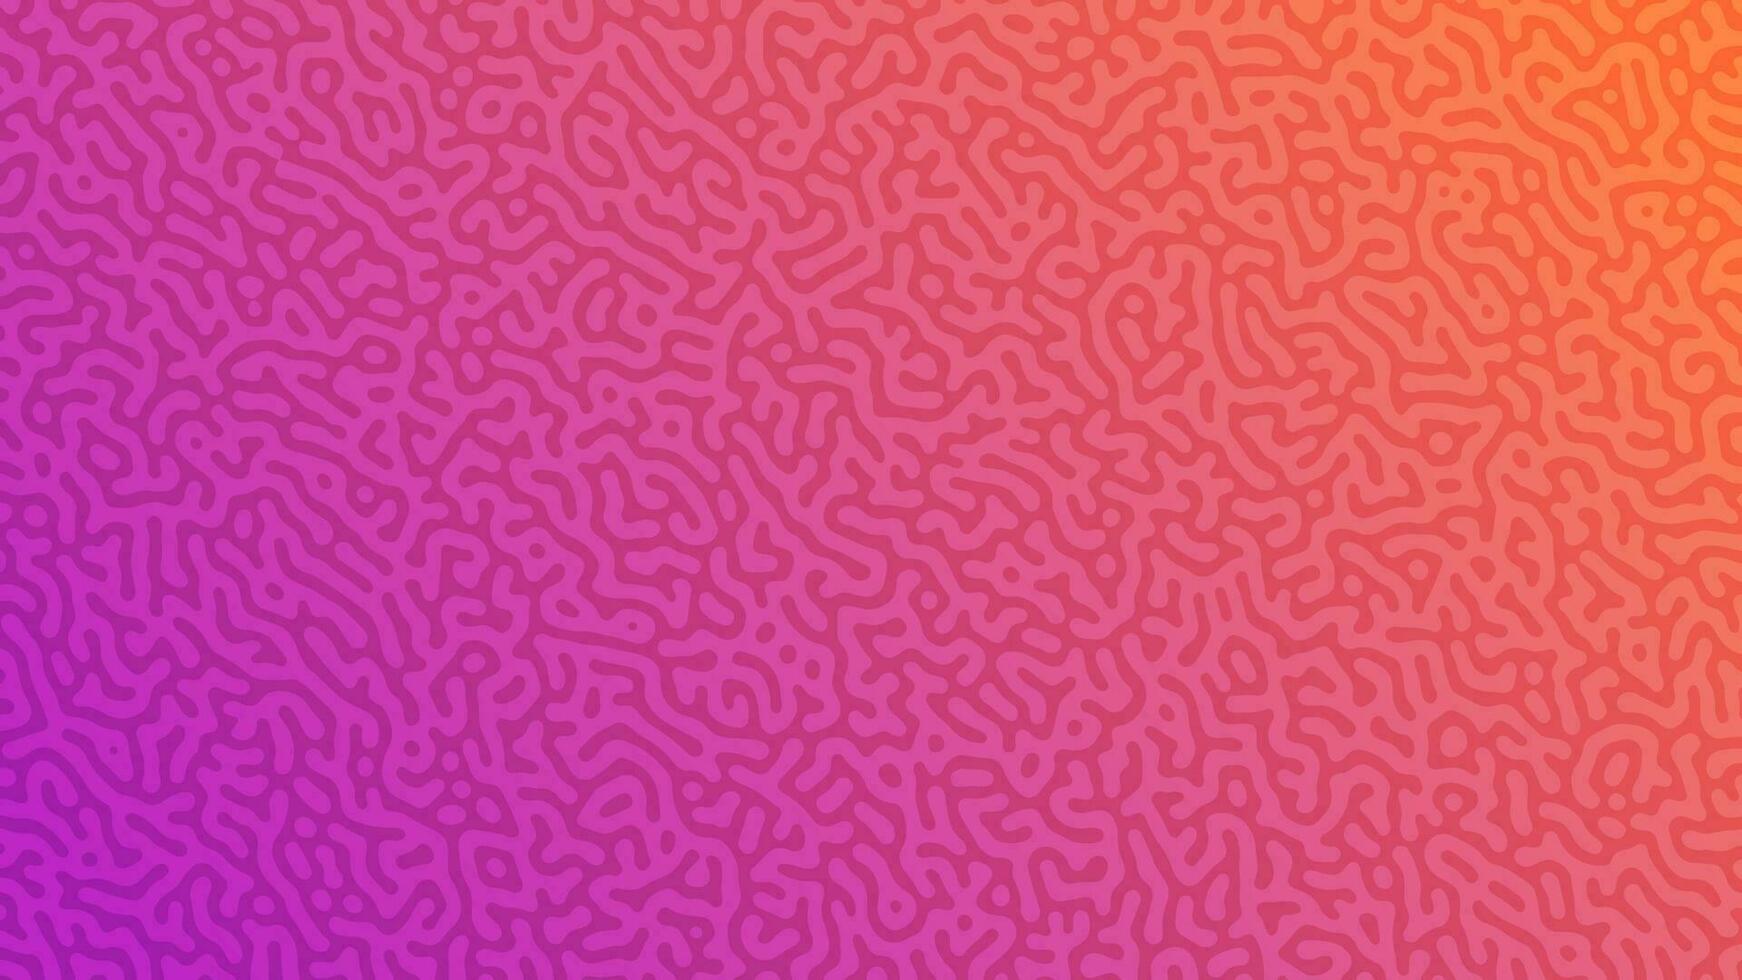 Purple Turing reaction gradient background. Abstract diffusion pattern with chaotic shapes. Vector illustration.